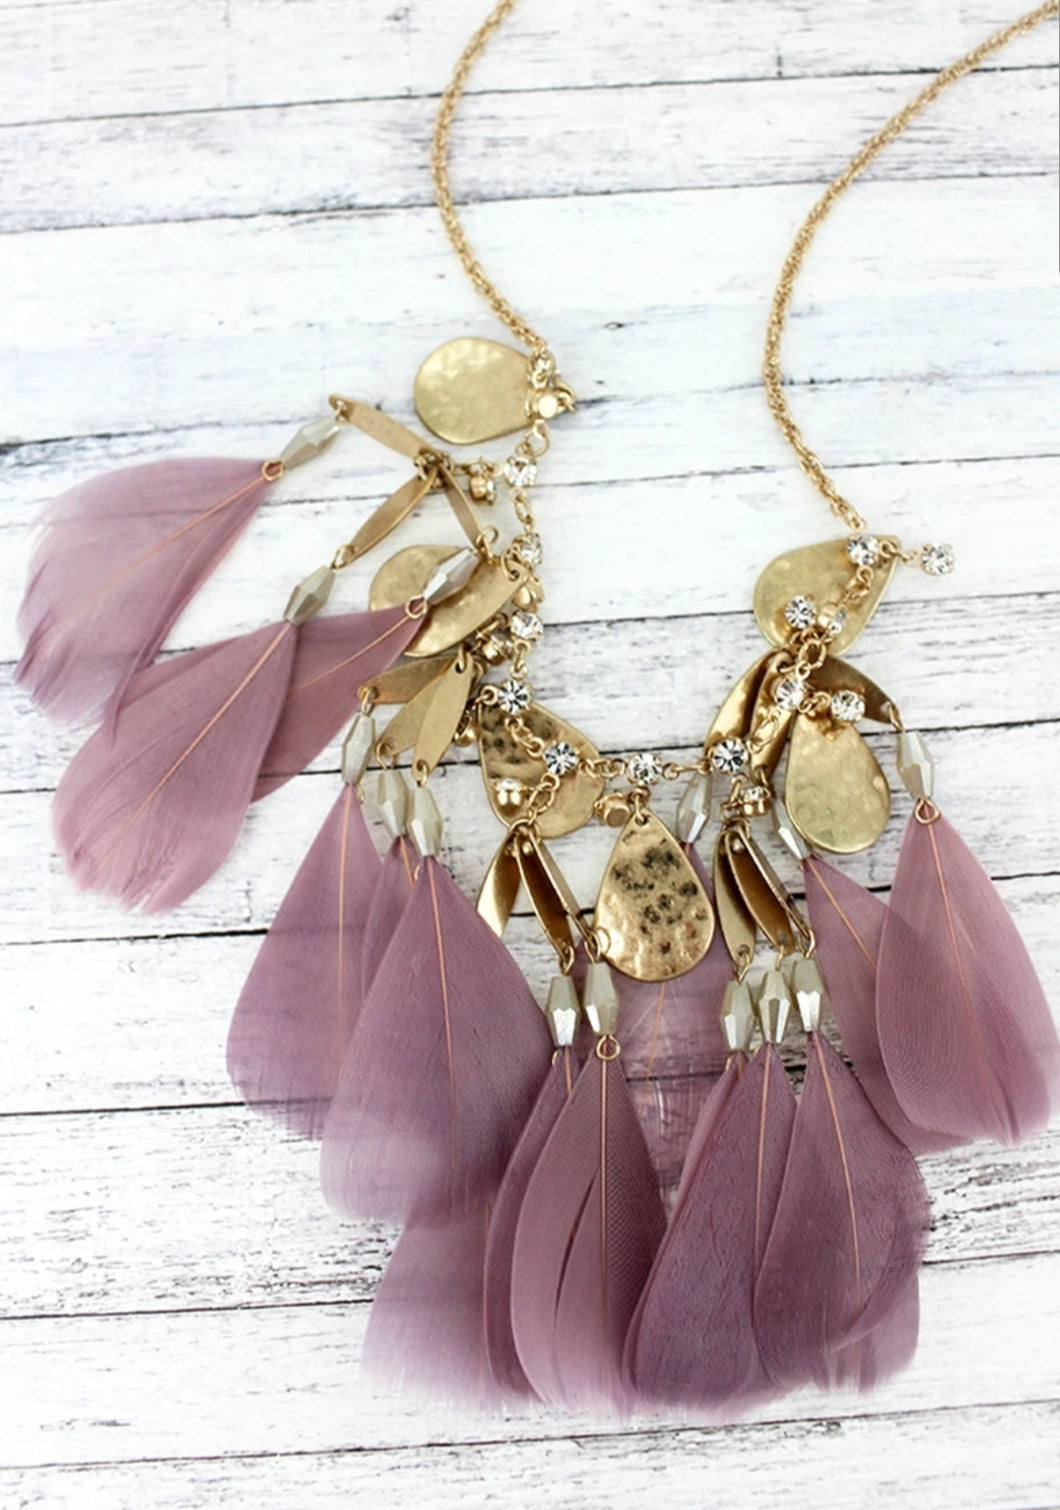 CRAVE GOLDTONE TEARDROP AND LAVENDER FEATHER CHARM NECKLACE